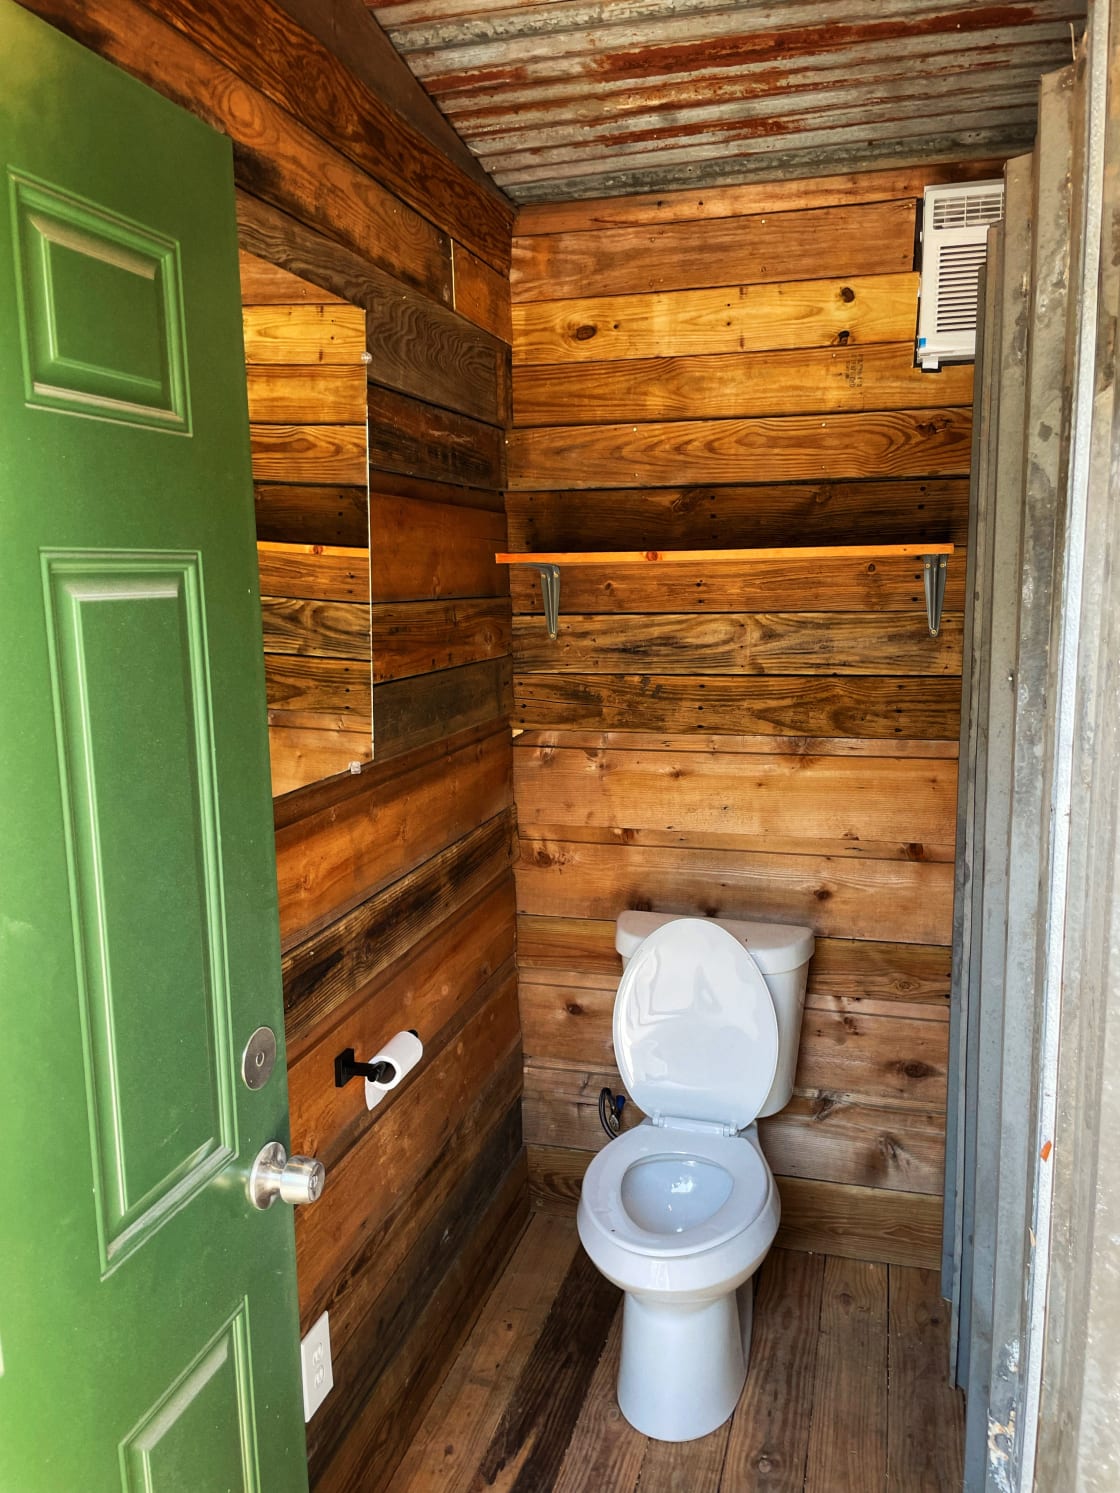 2 stall air conditioned restrooms